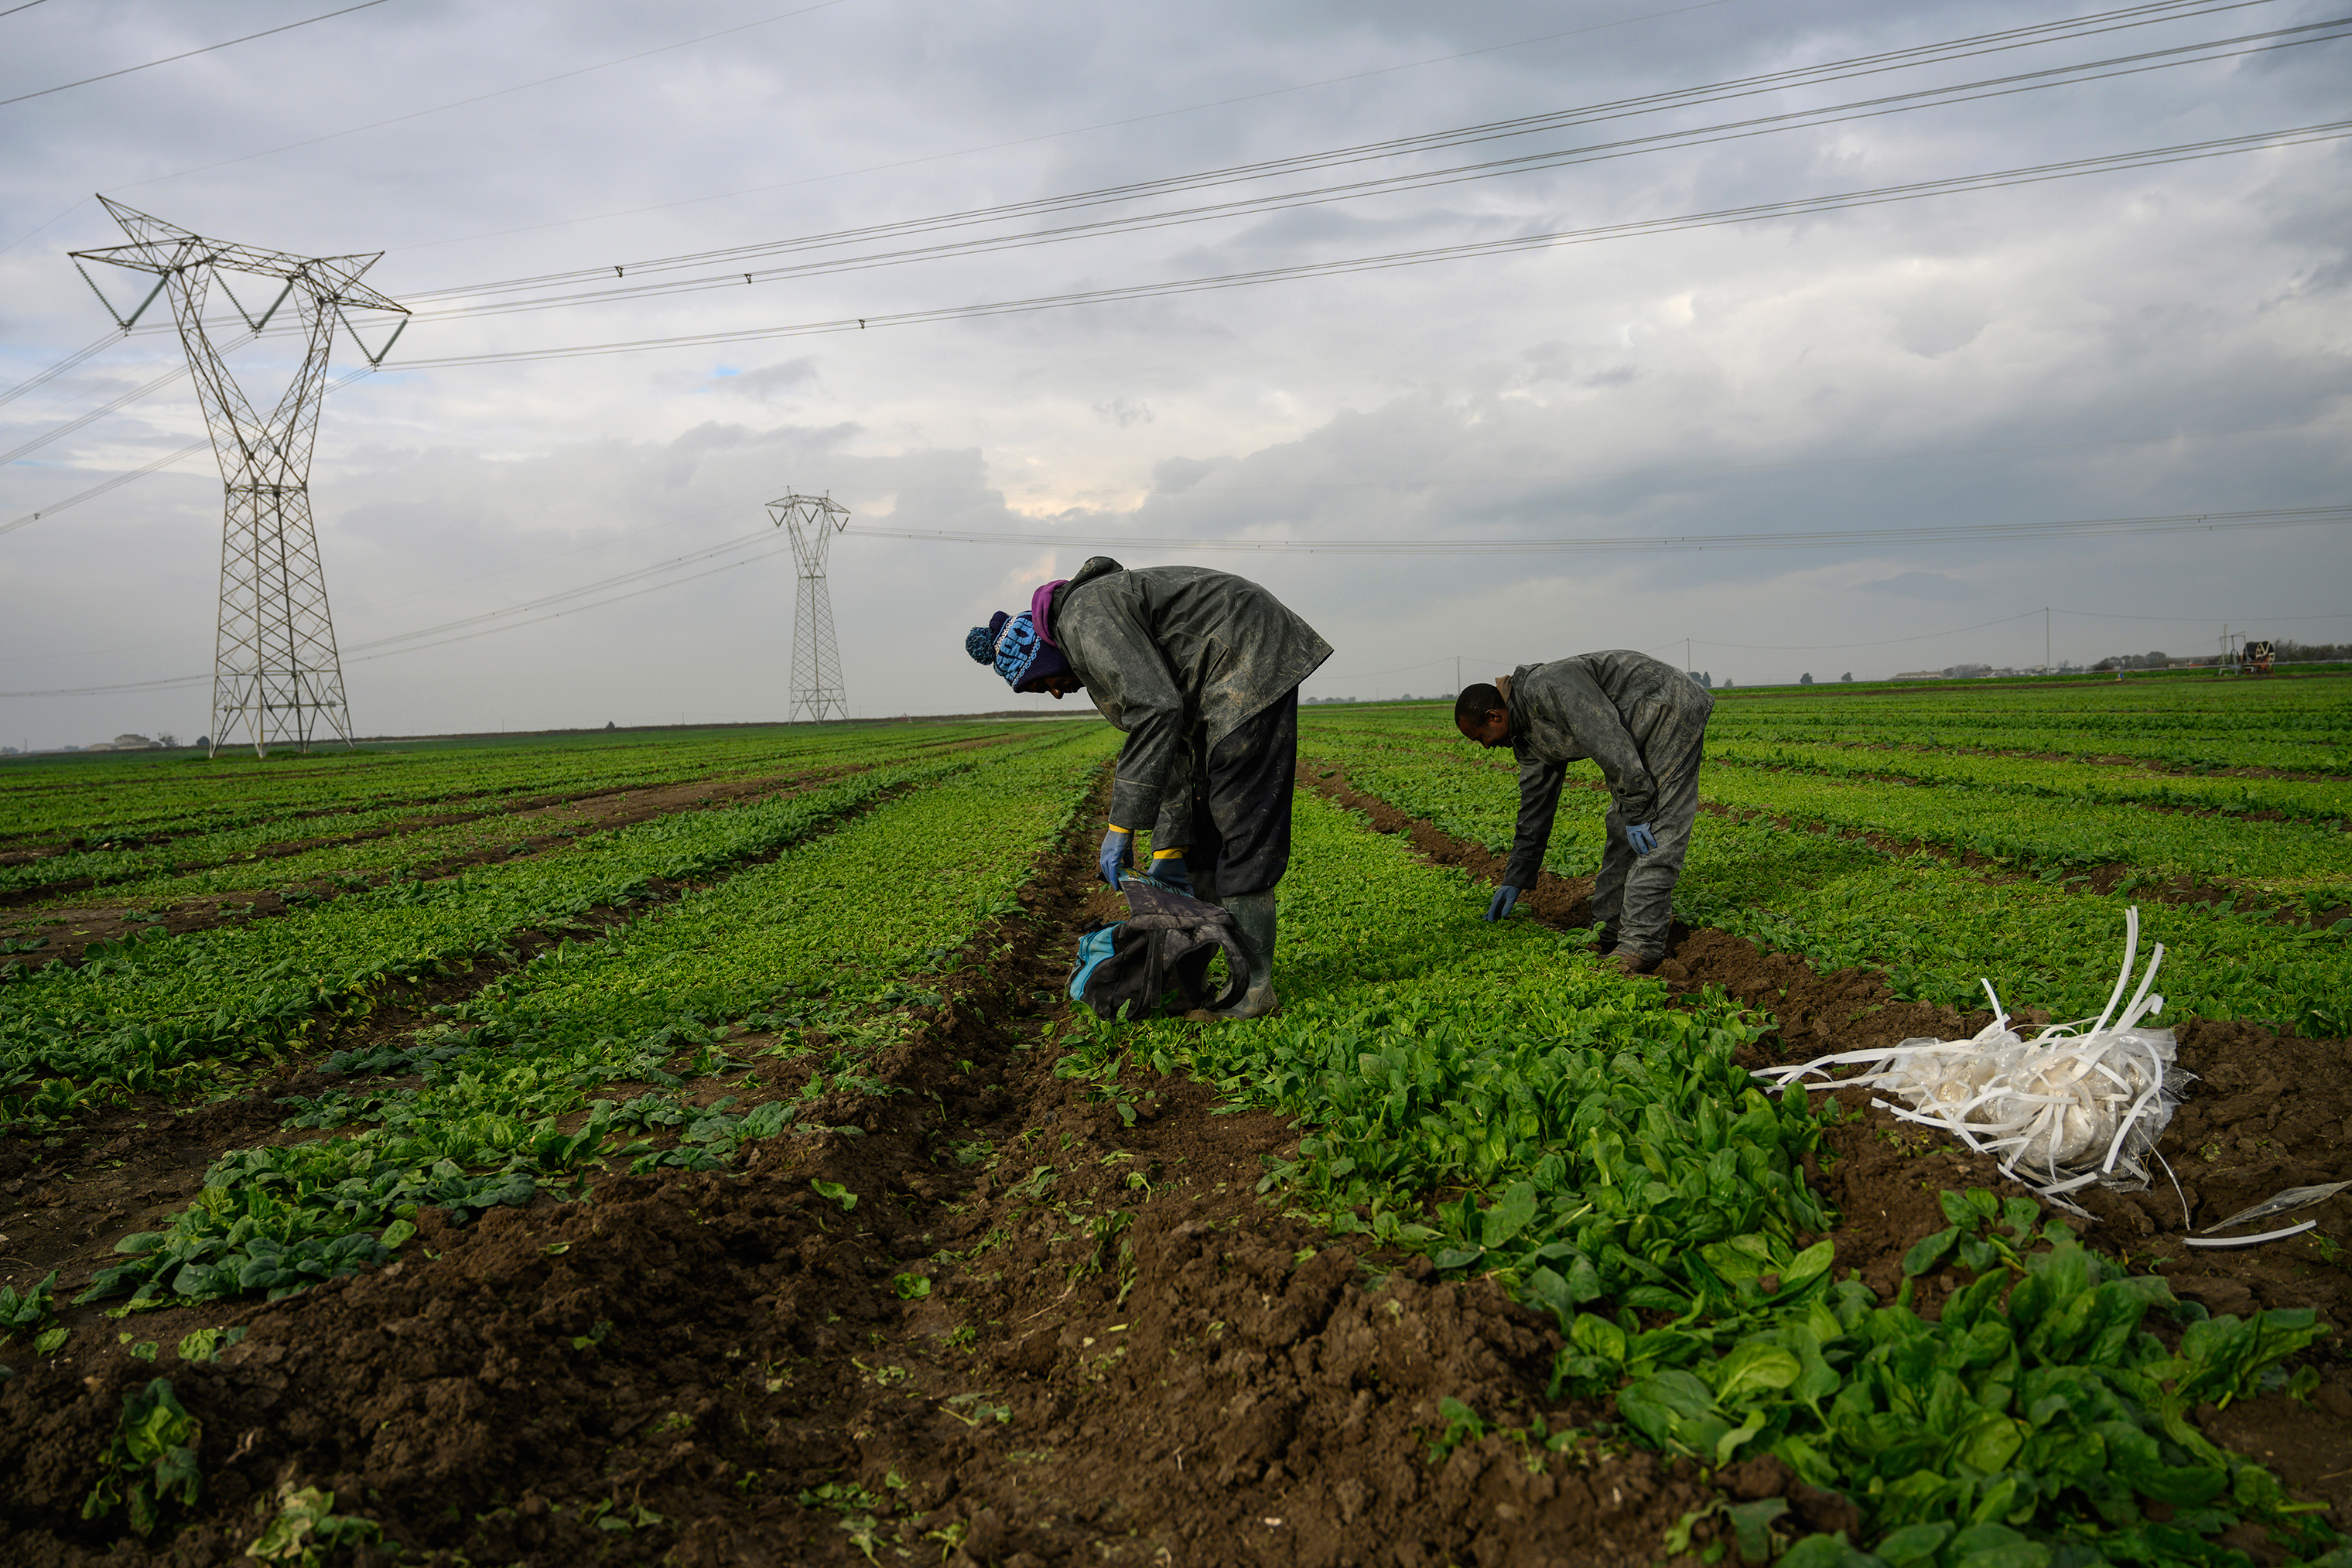 African day laborers who are part of the caporalato system of cheap labor work the fields around Foggia, Italy (Lynsey Addario for TIME)